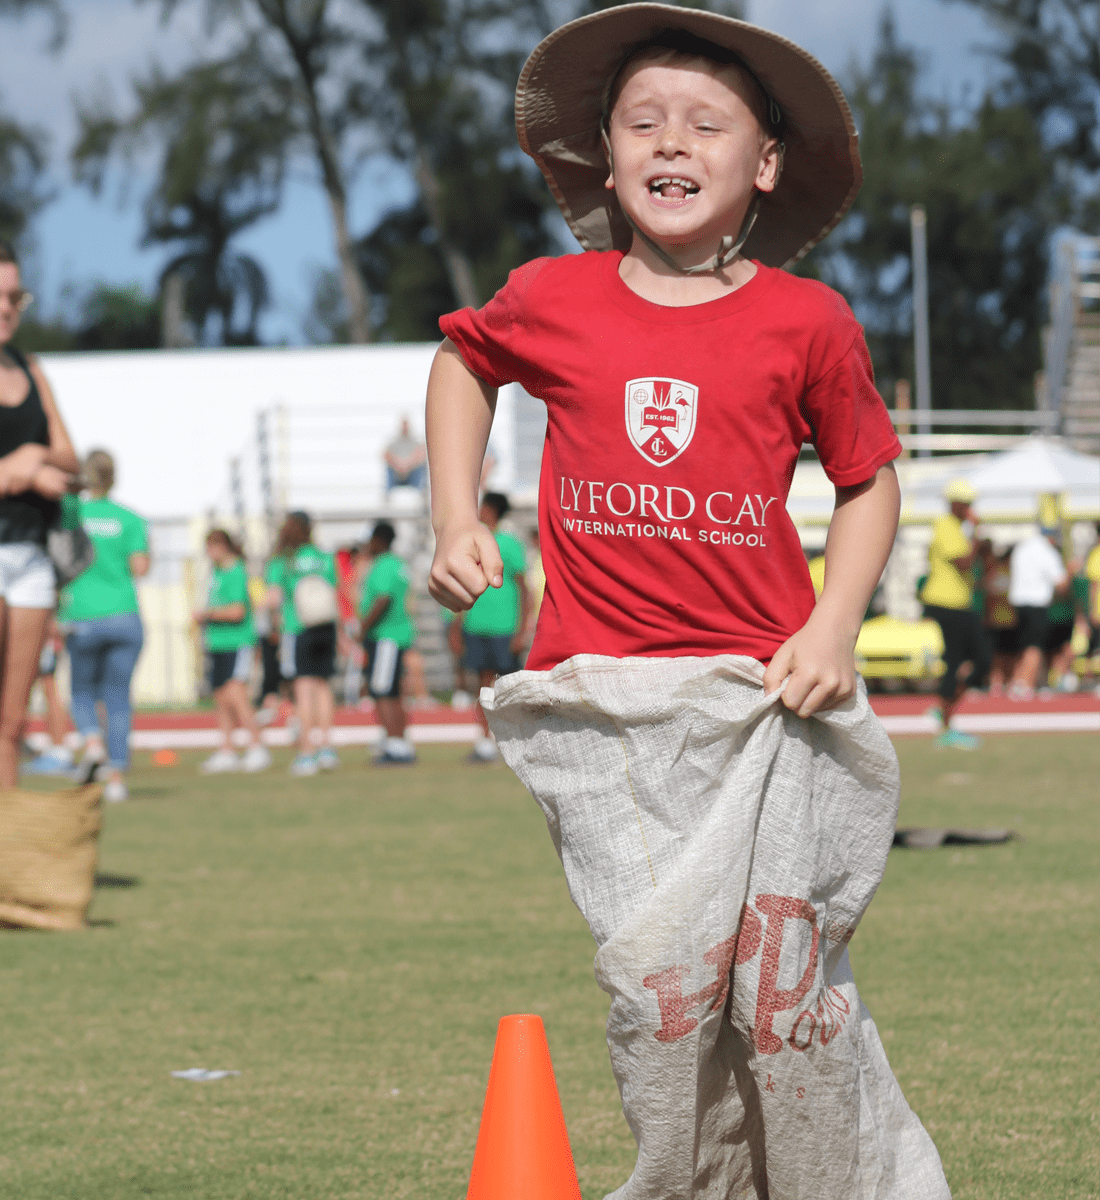 Physical education: student in a bean bag race